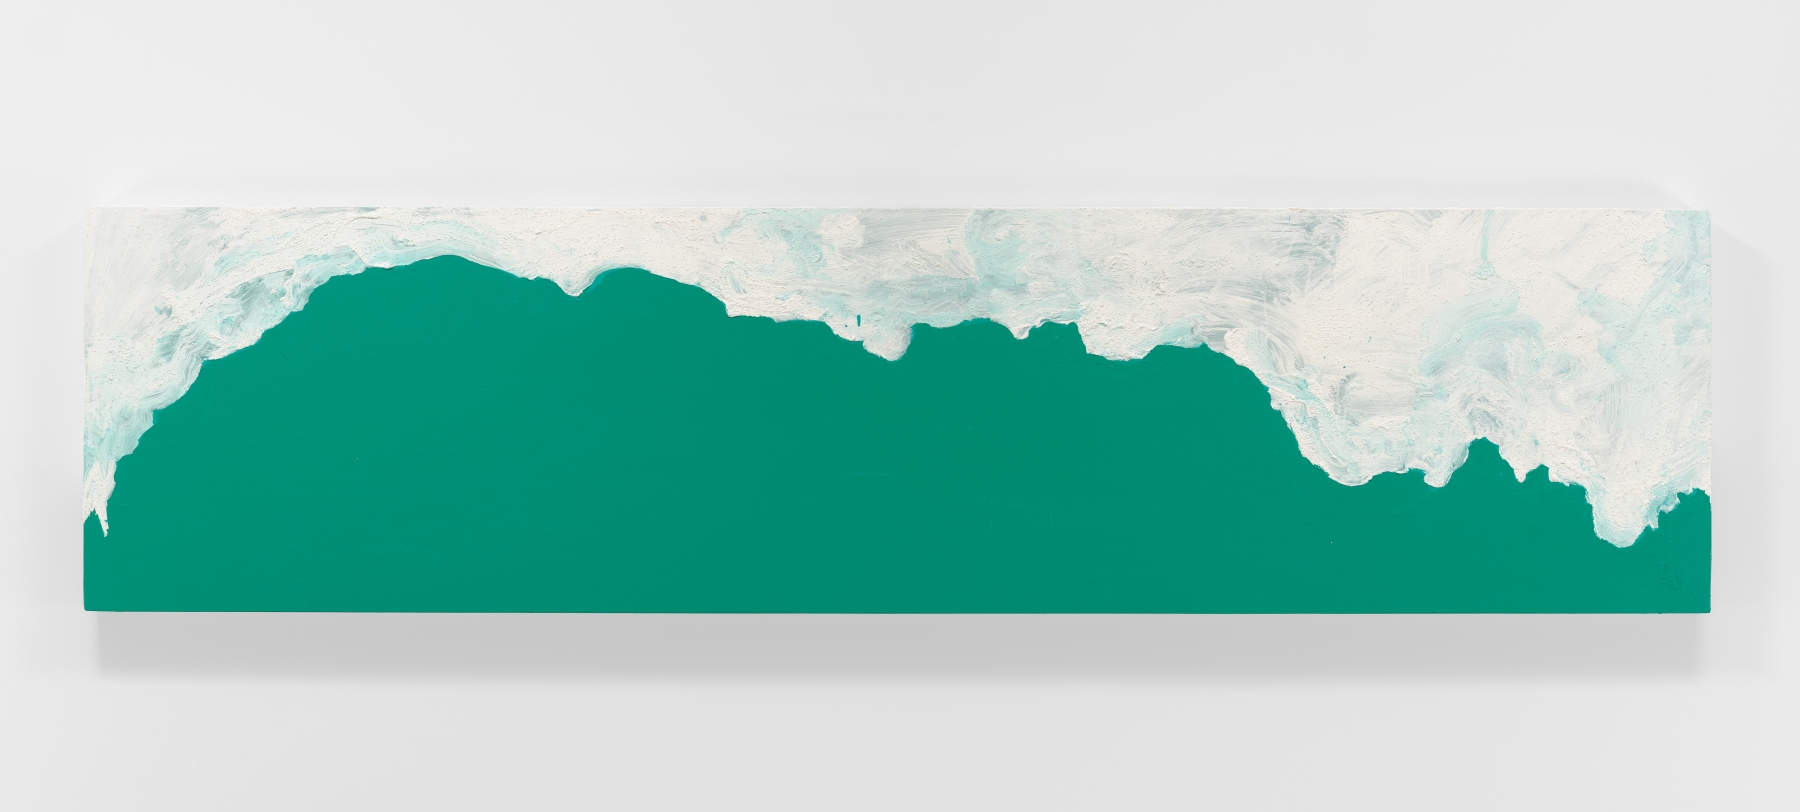 Mary Heilmann

Windansea

2020

Acrylic on wood panel

24 x 96 x 3 inches (61 x 243.8 x 7.6 cm)

Signed, dated, titled verso

MH 705

&amp;nbsp;

INQUIRE